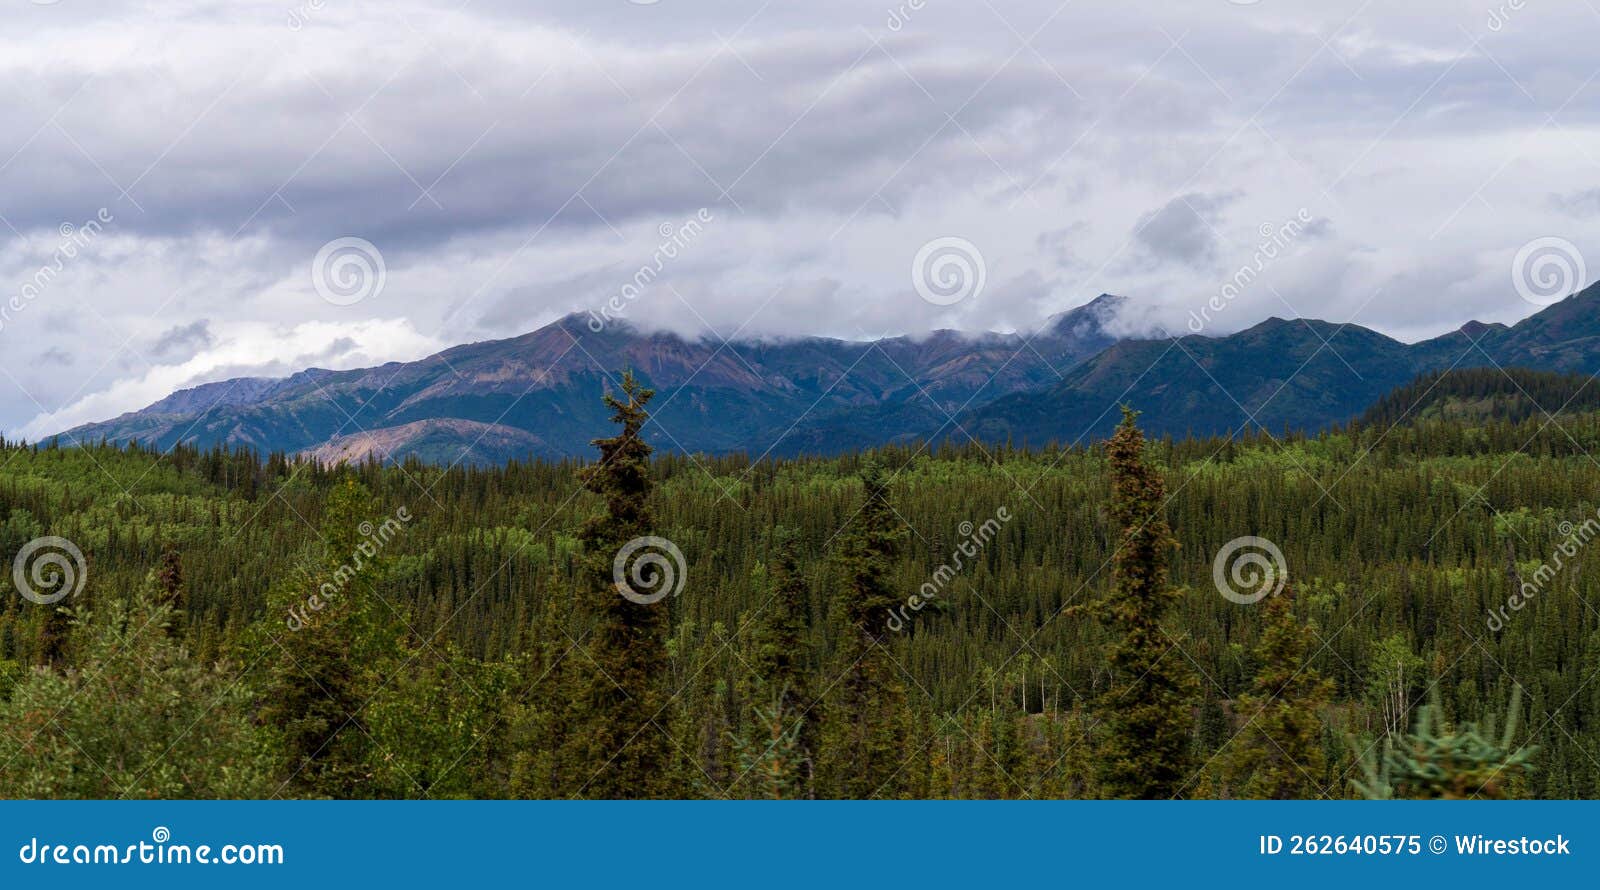 scenic shot of the alaska range in the southcentral region of alaska, usa under a cloudy sky